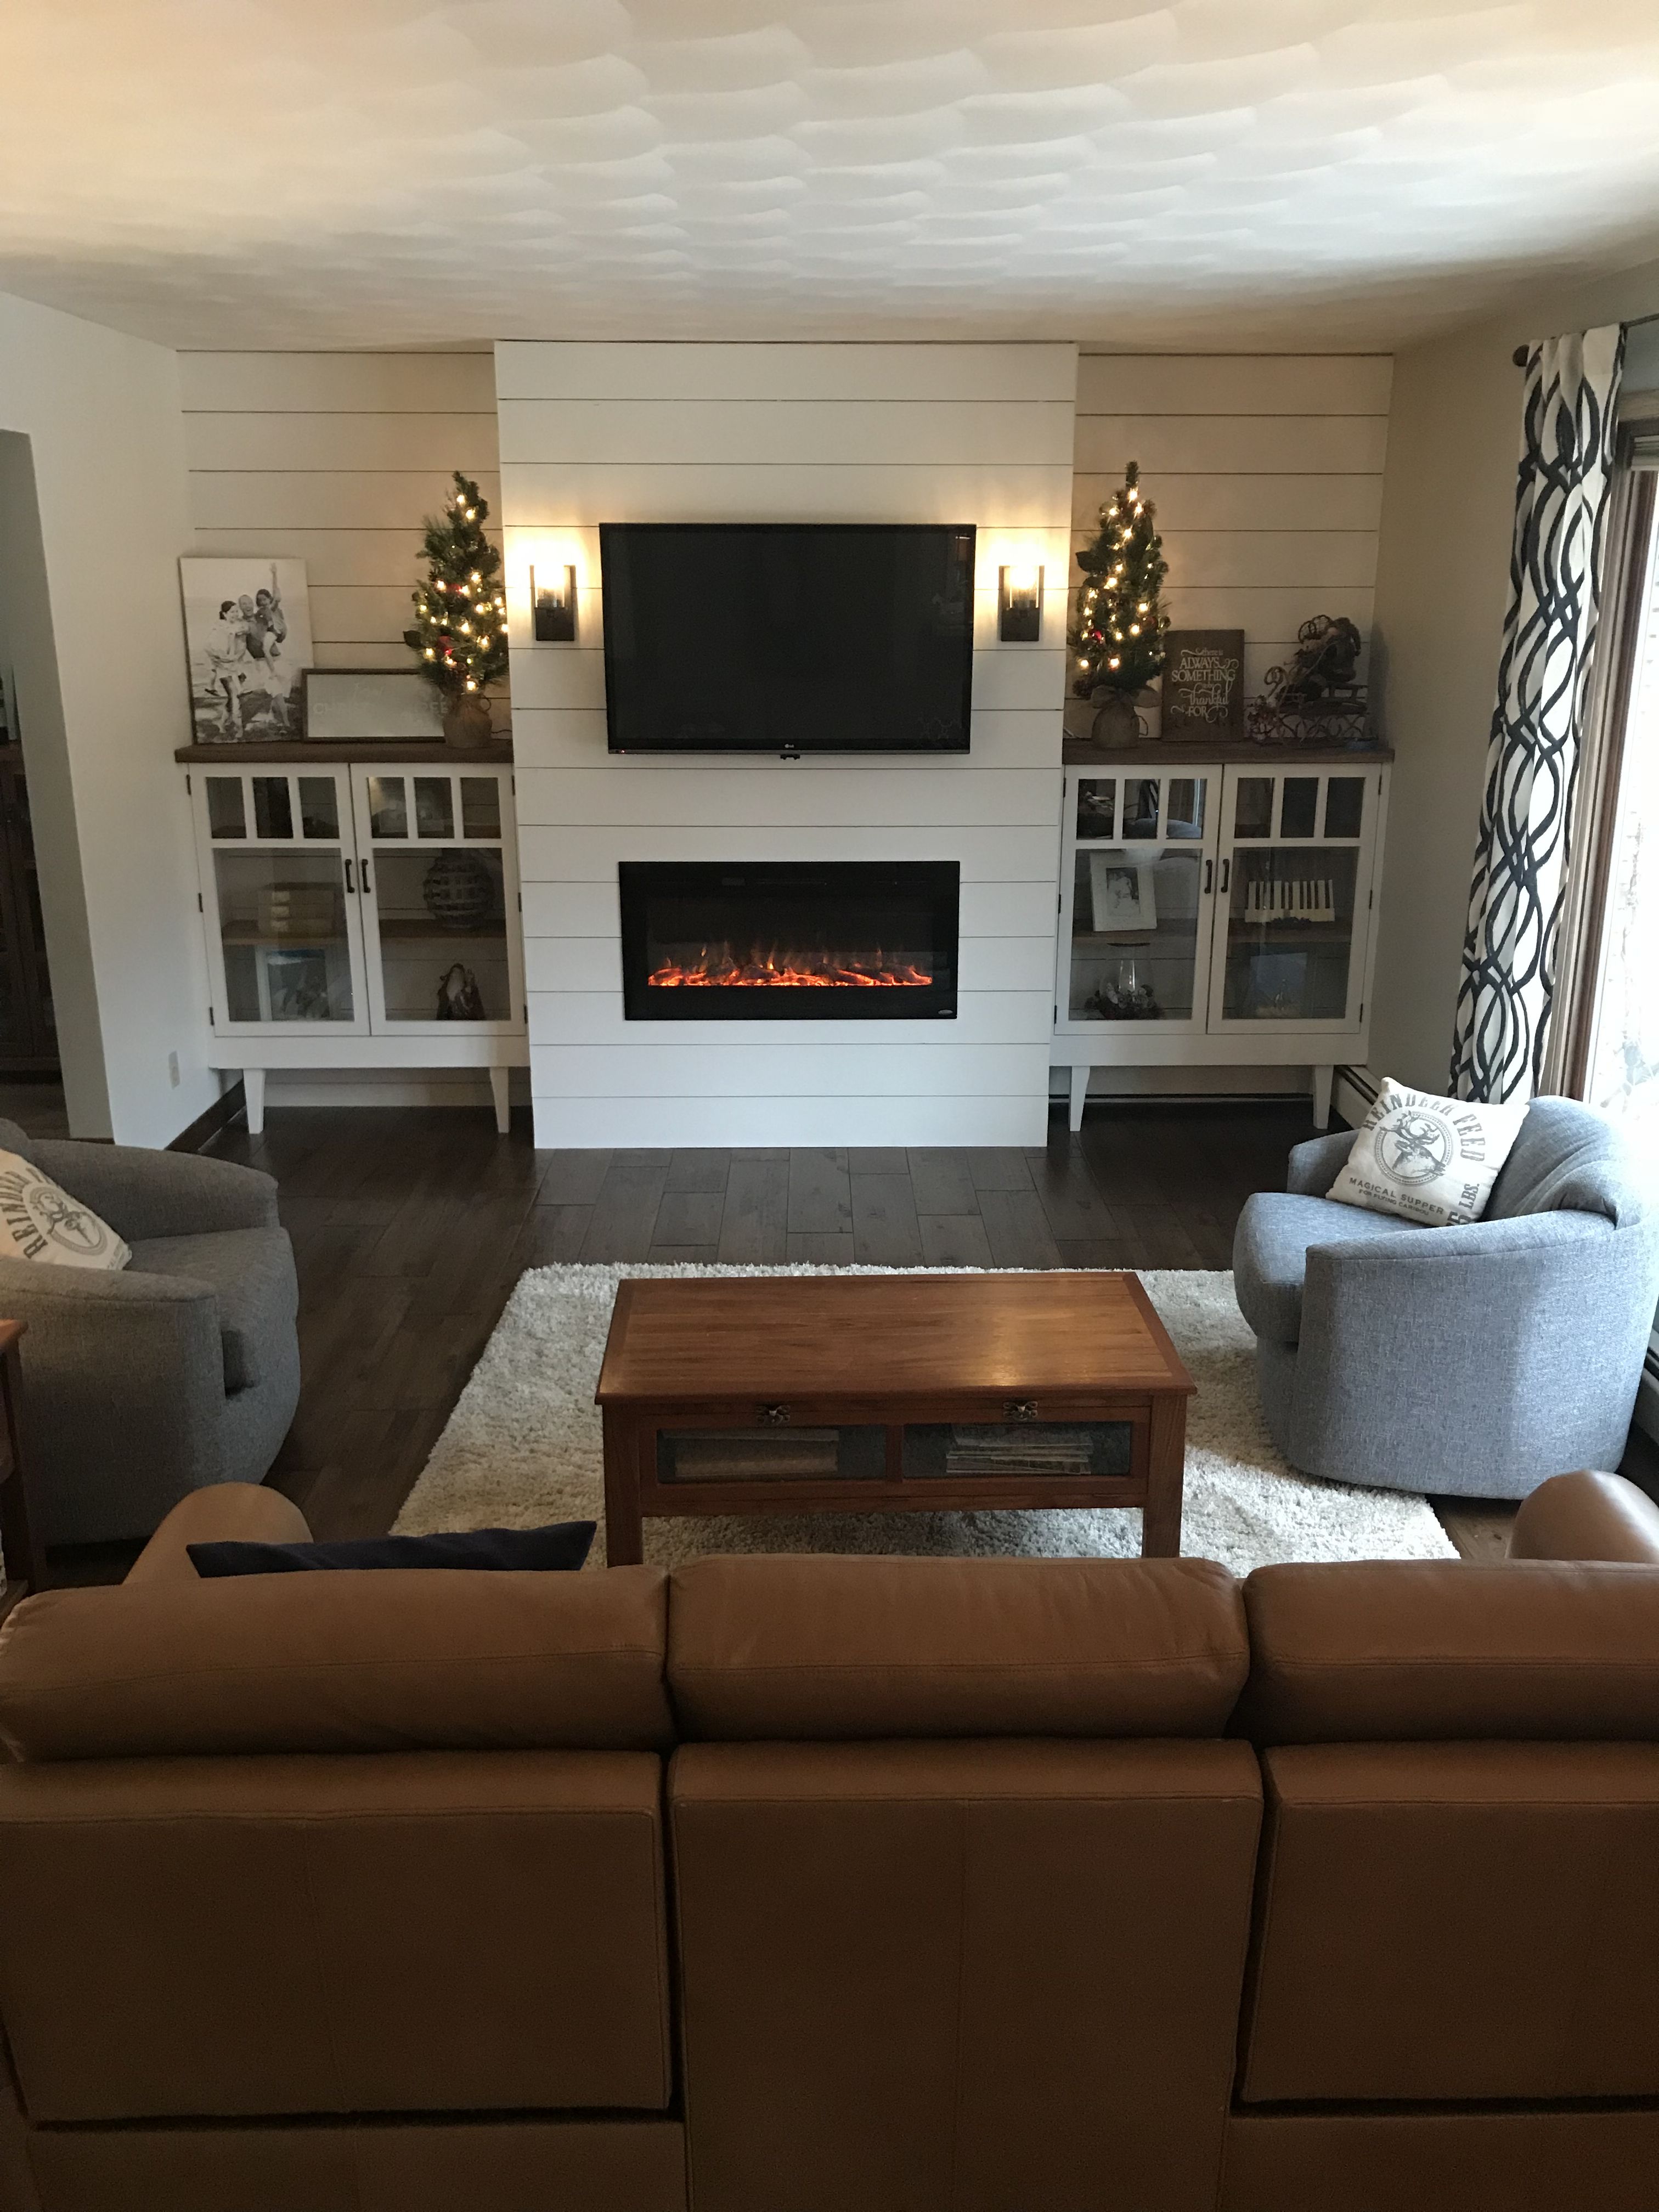 Fireplace Restoration Elegant Built In Cabinets with Shiplap Fireplace